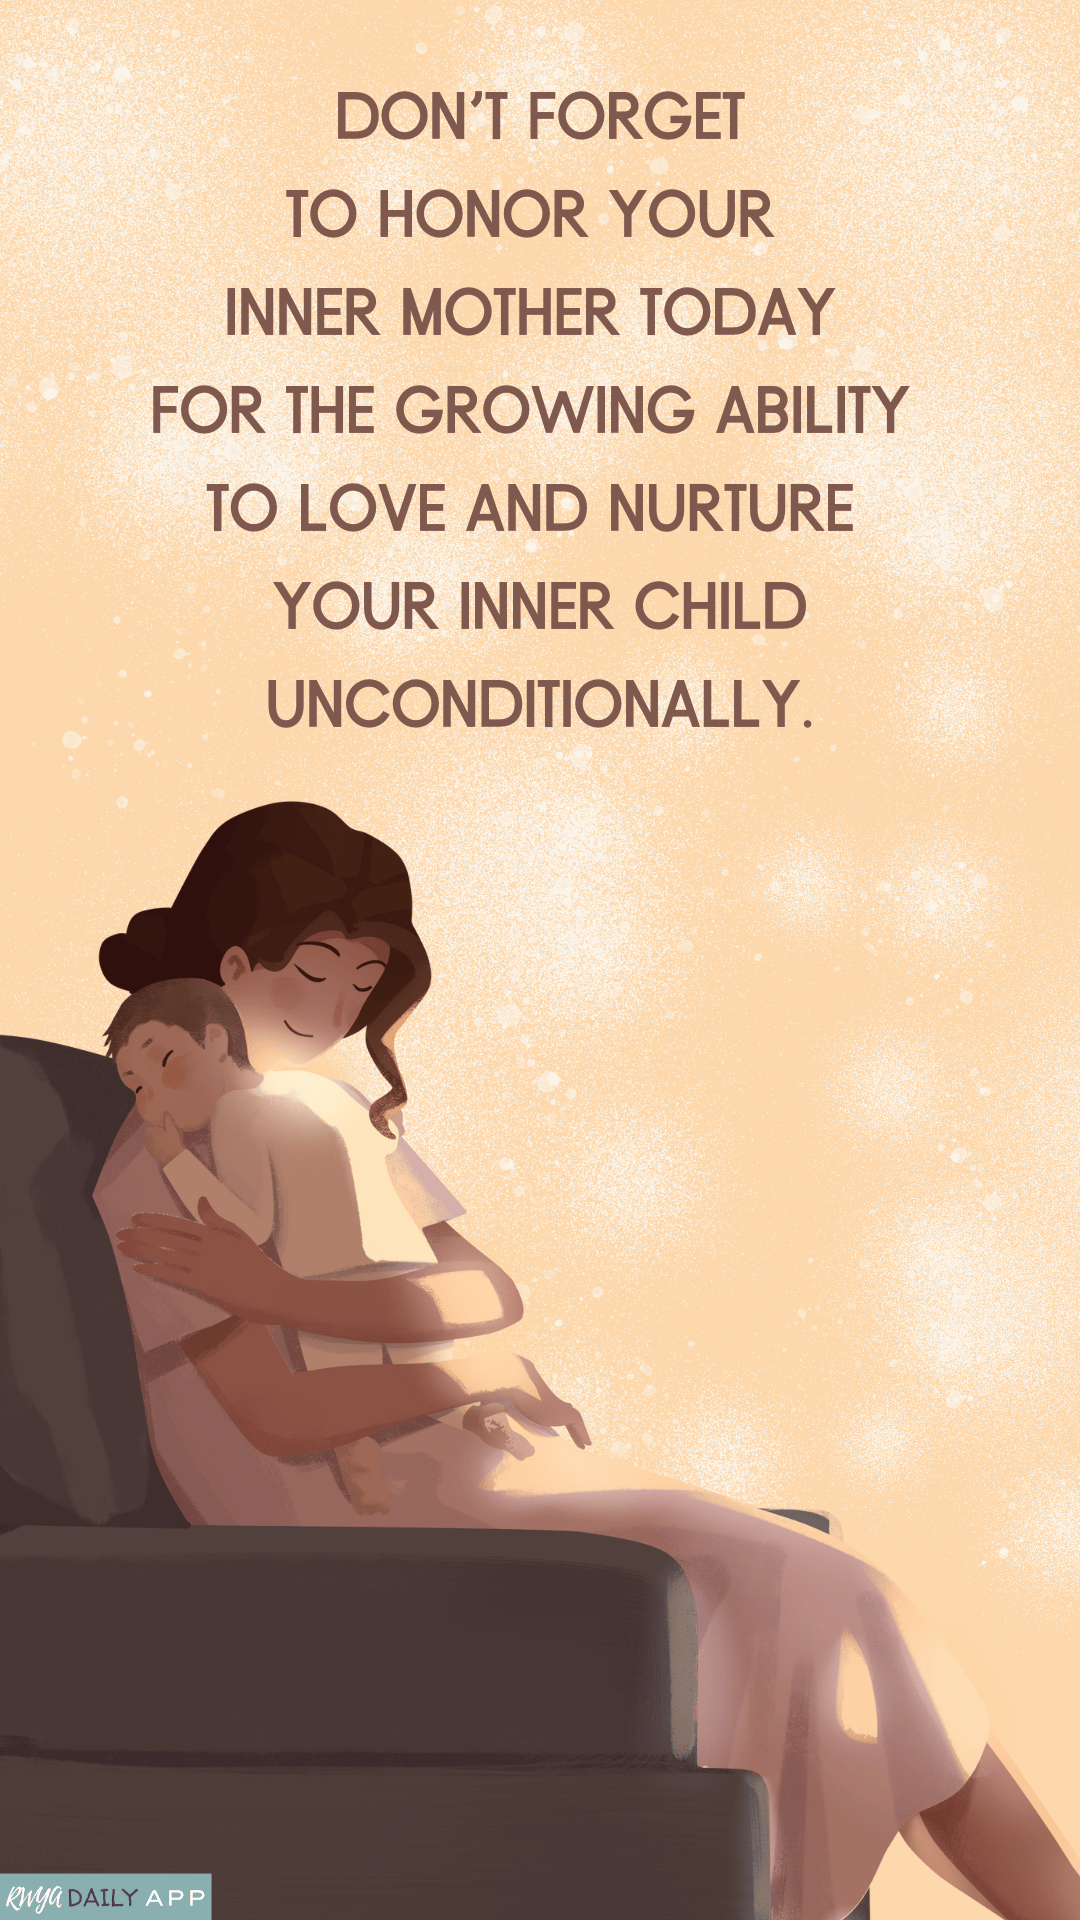 Don't forget to honor your inner mother today for the growing ability to love and nurture your inner child unconditIionally.